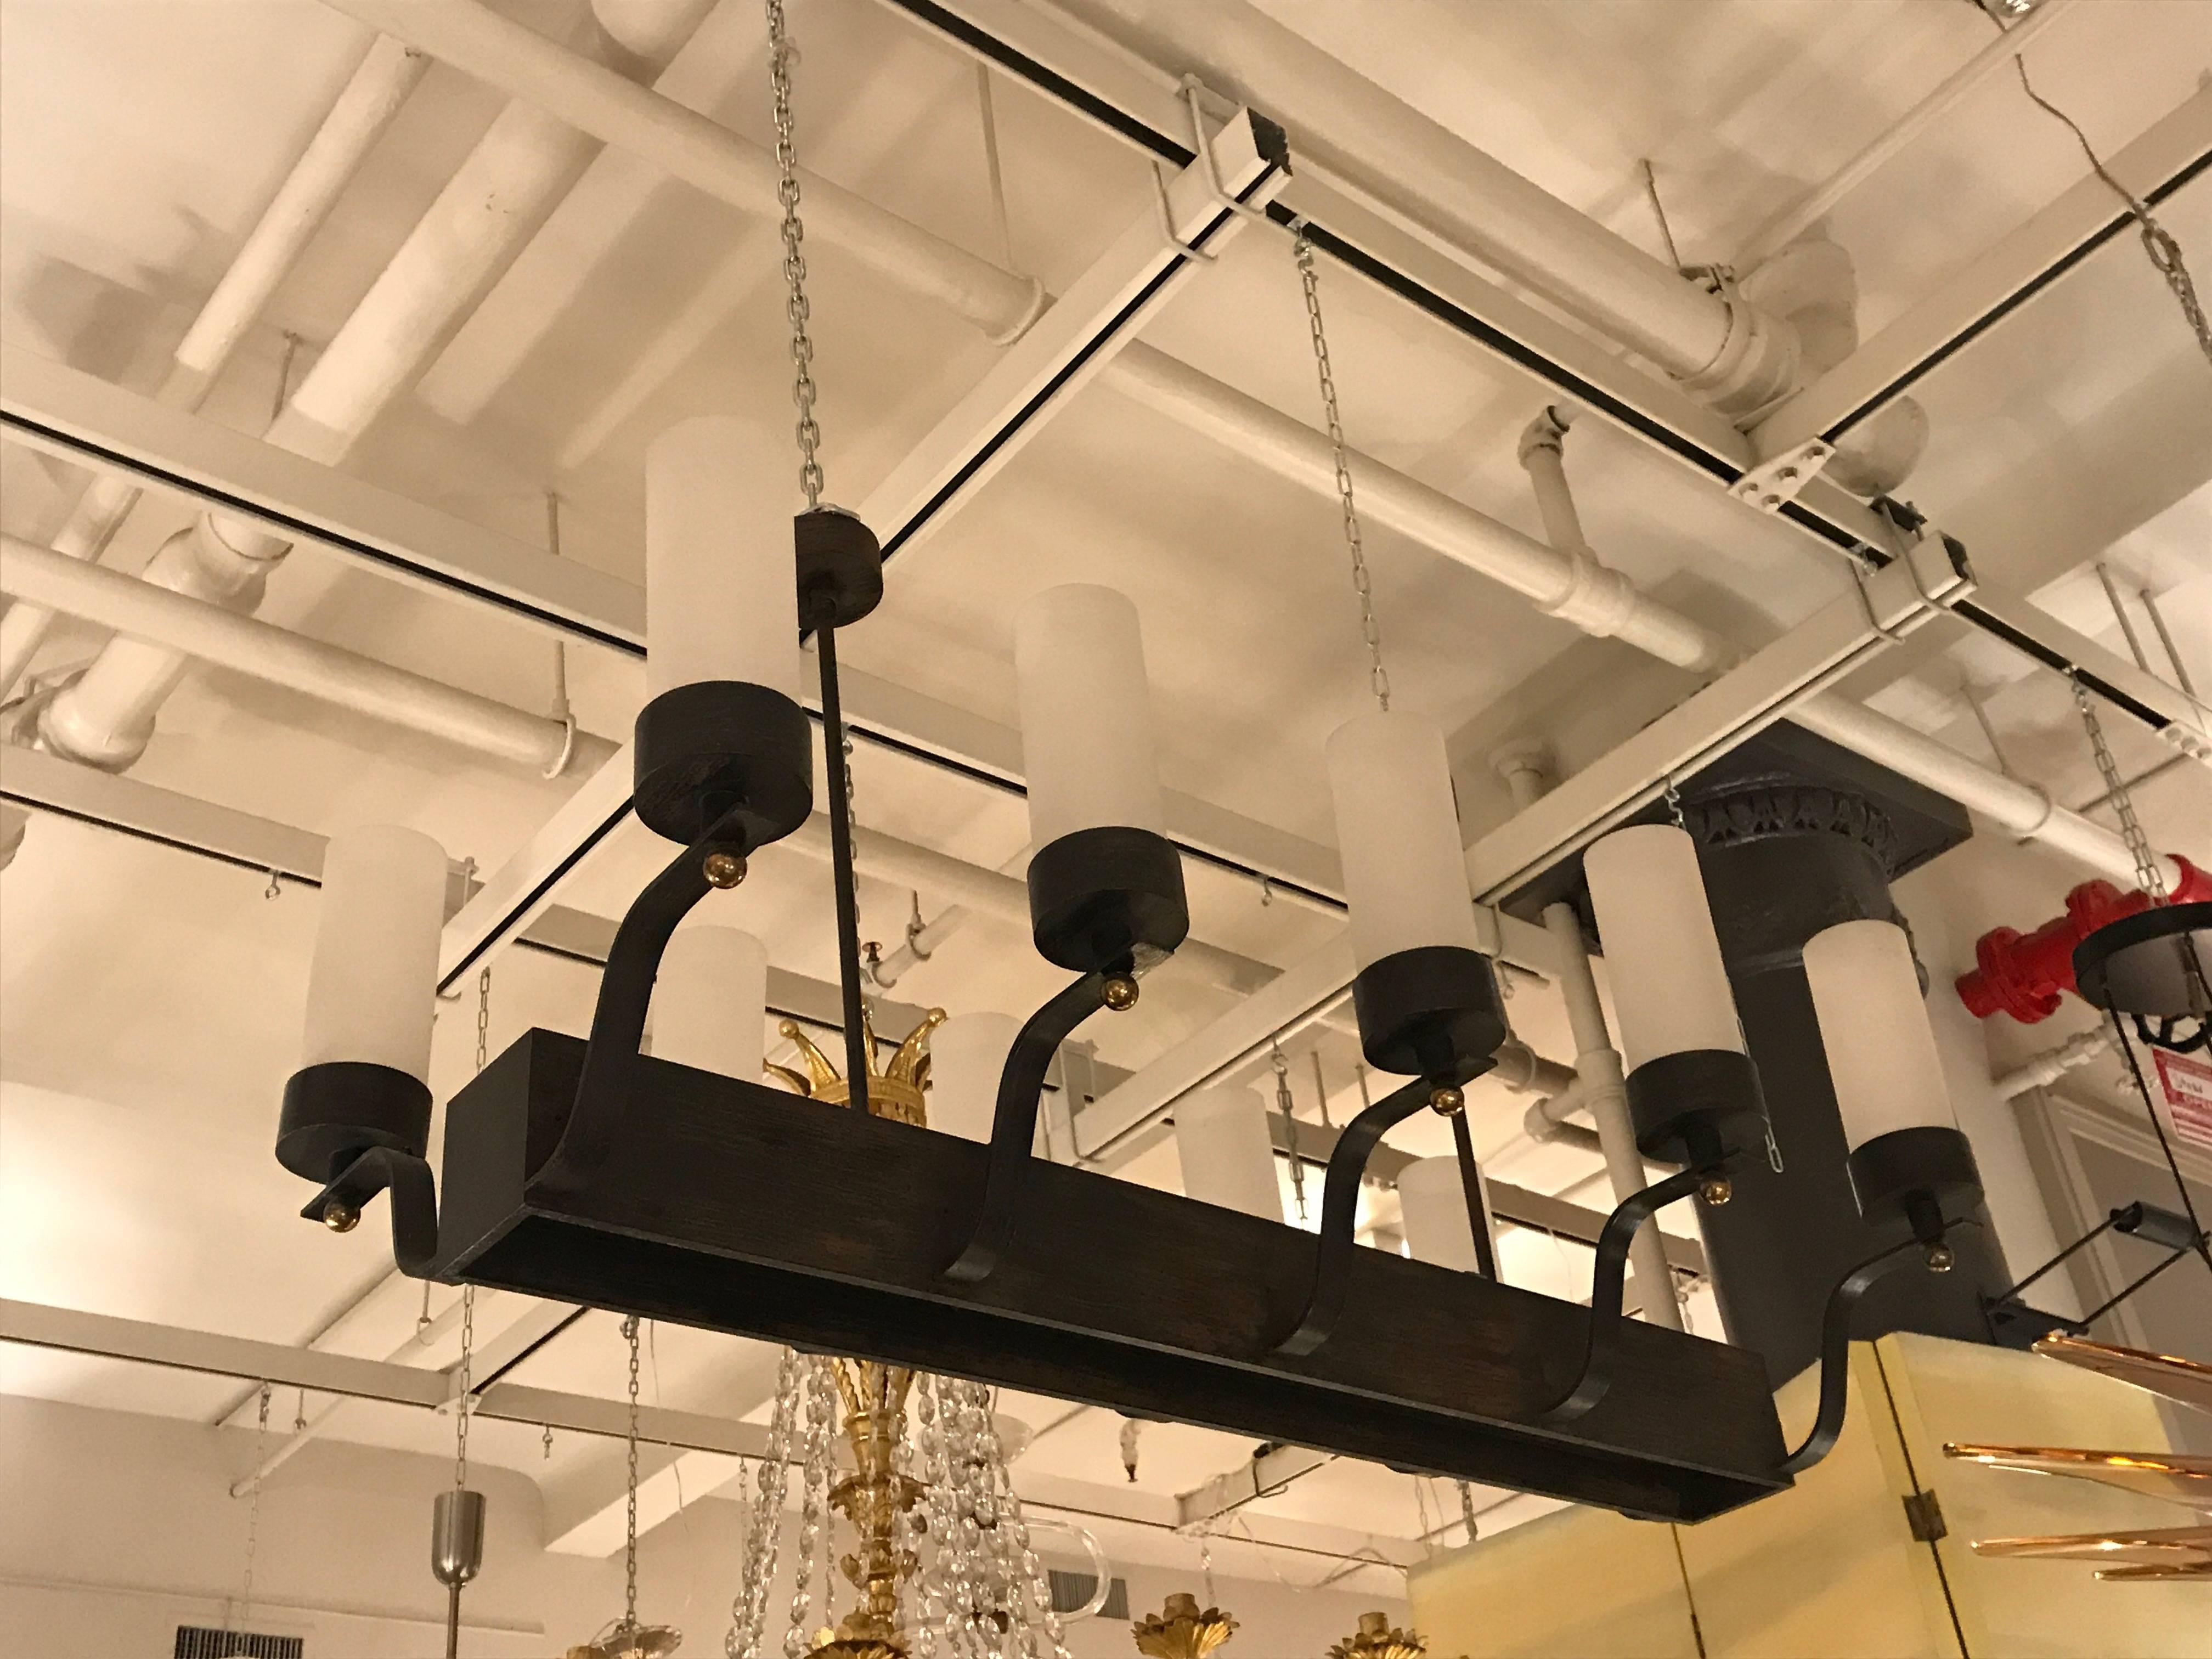 Patinated iron, rectangular structure with ten up-curving arms (five on each side) supporting cylindrical shades of white glass with gilded bronze, spherical finials. The iron body is inset with frosted glass panes for down light and hangs from two